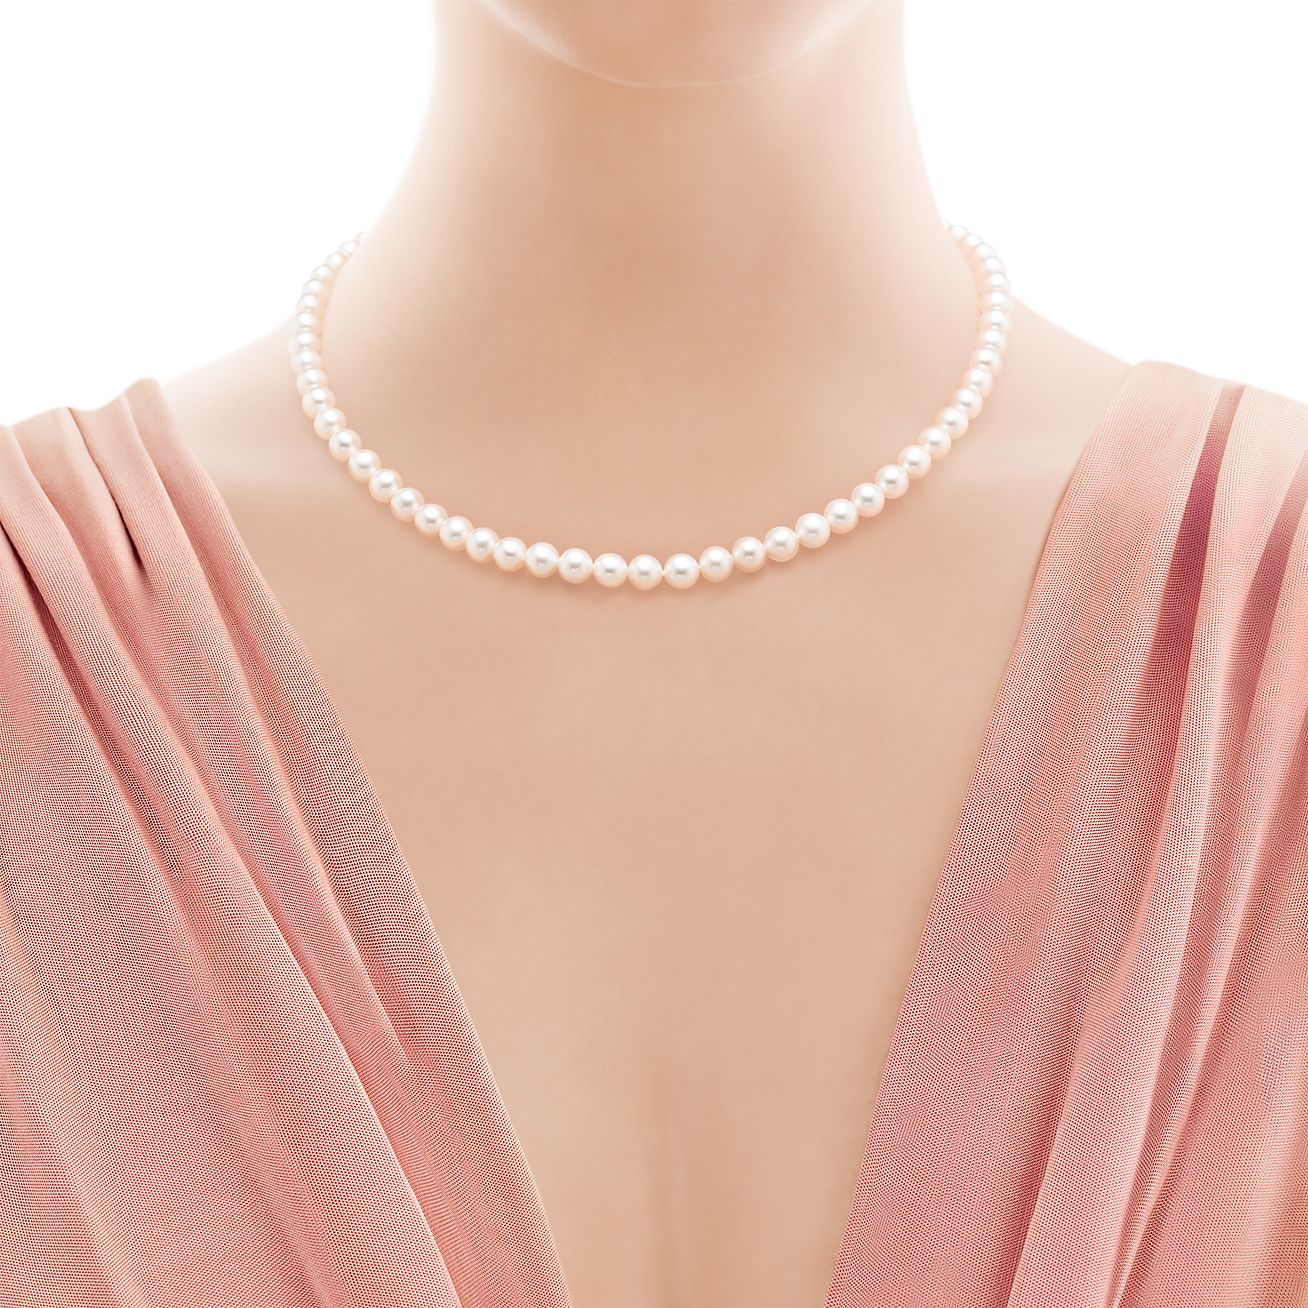 ziegfeld collection pearl necklace